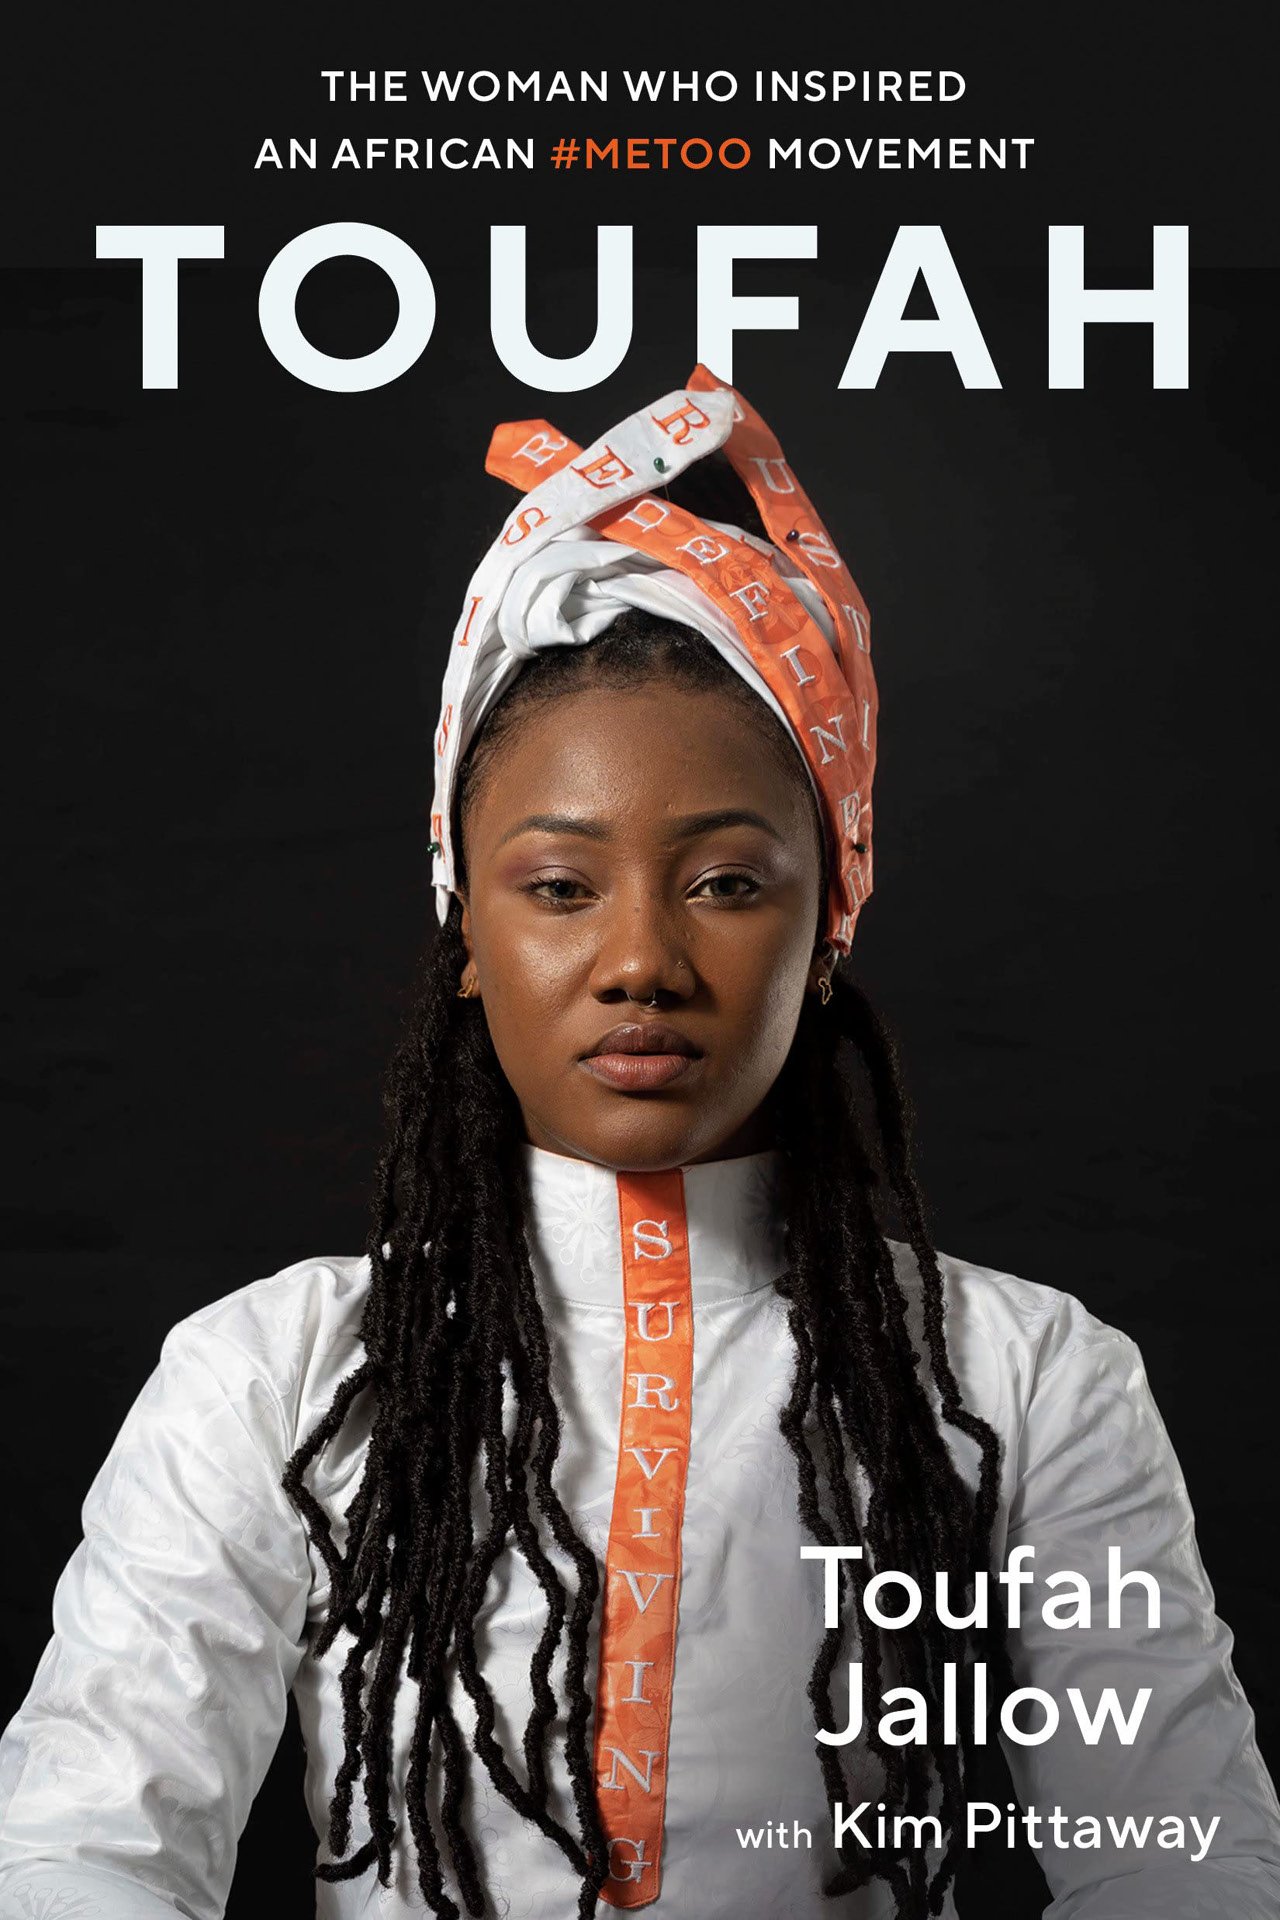 The cover of Toufah by Toufah Jallow with Kim Pittaway